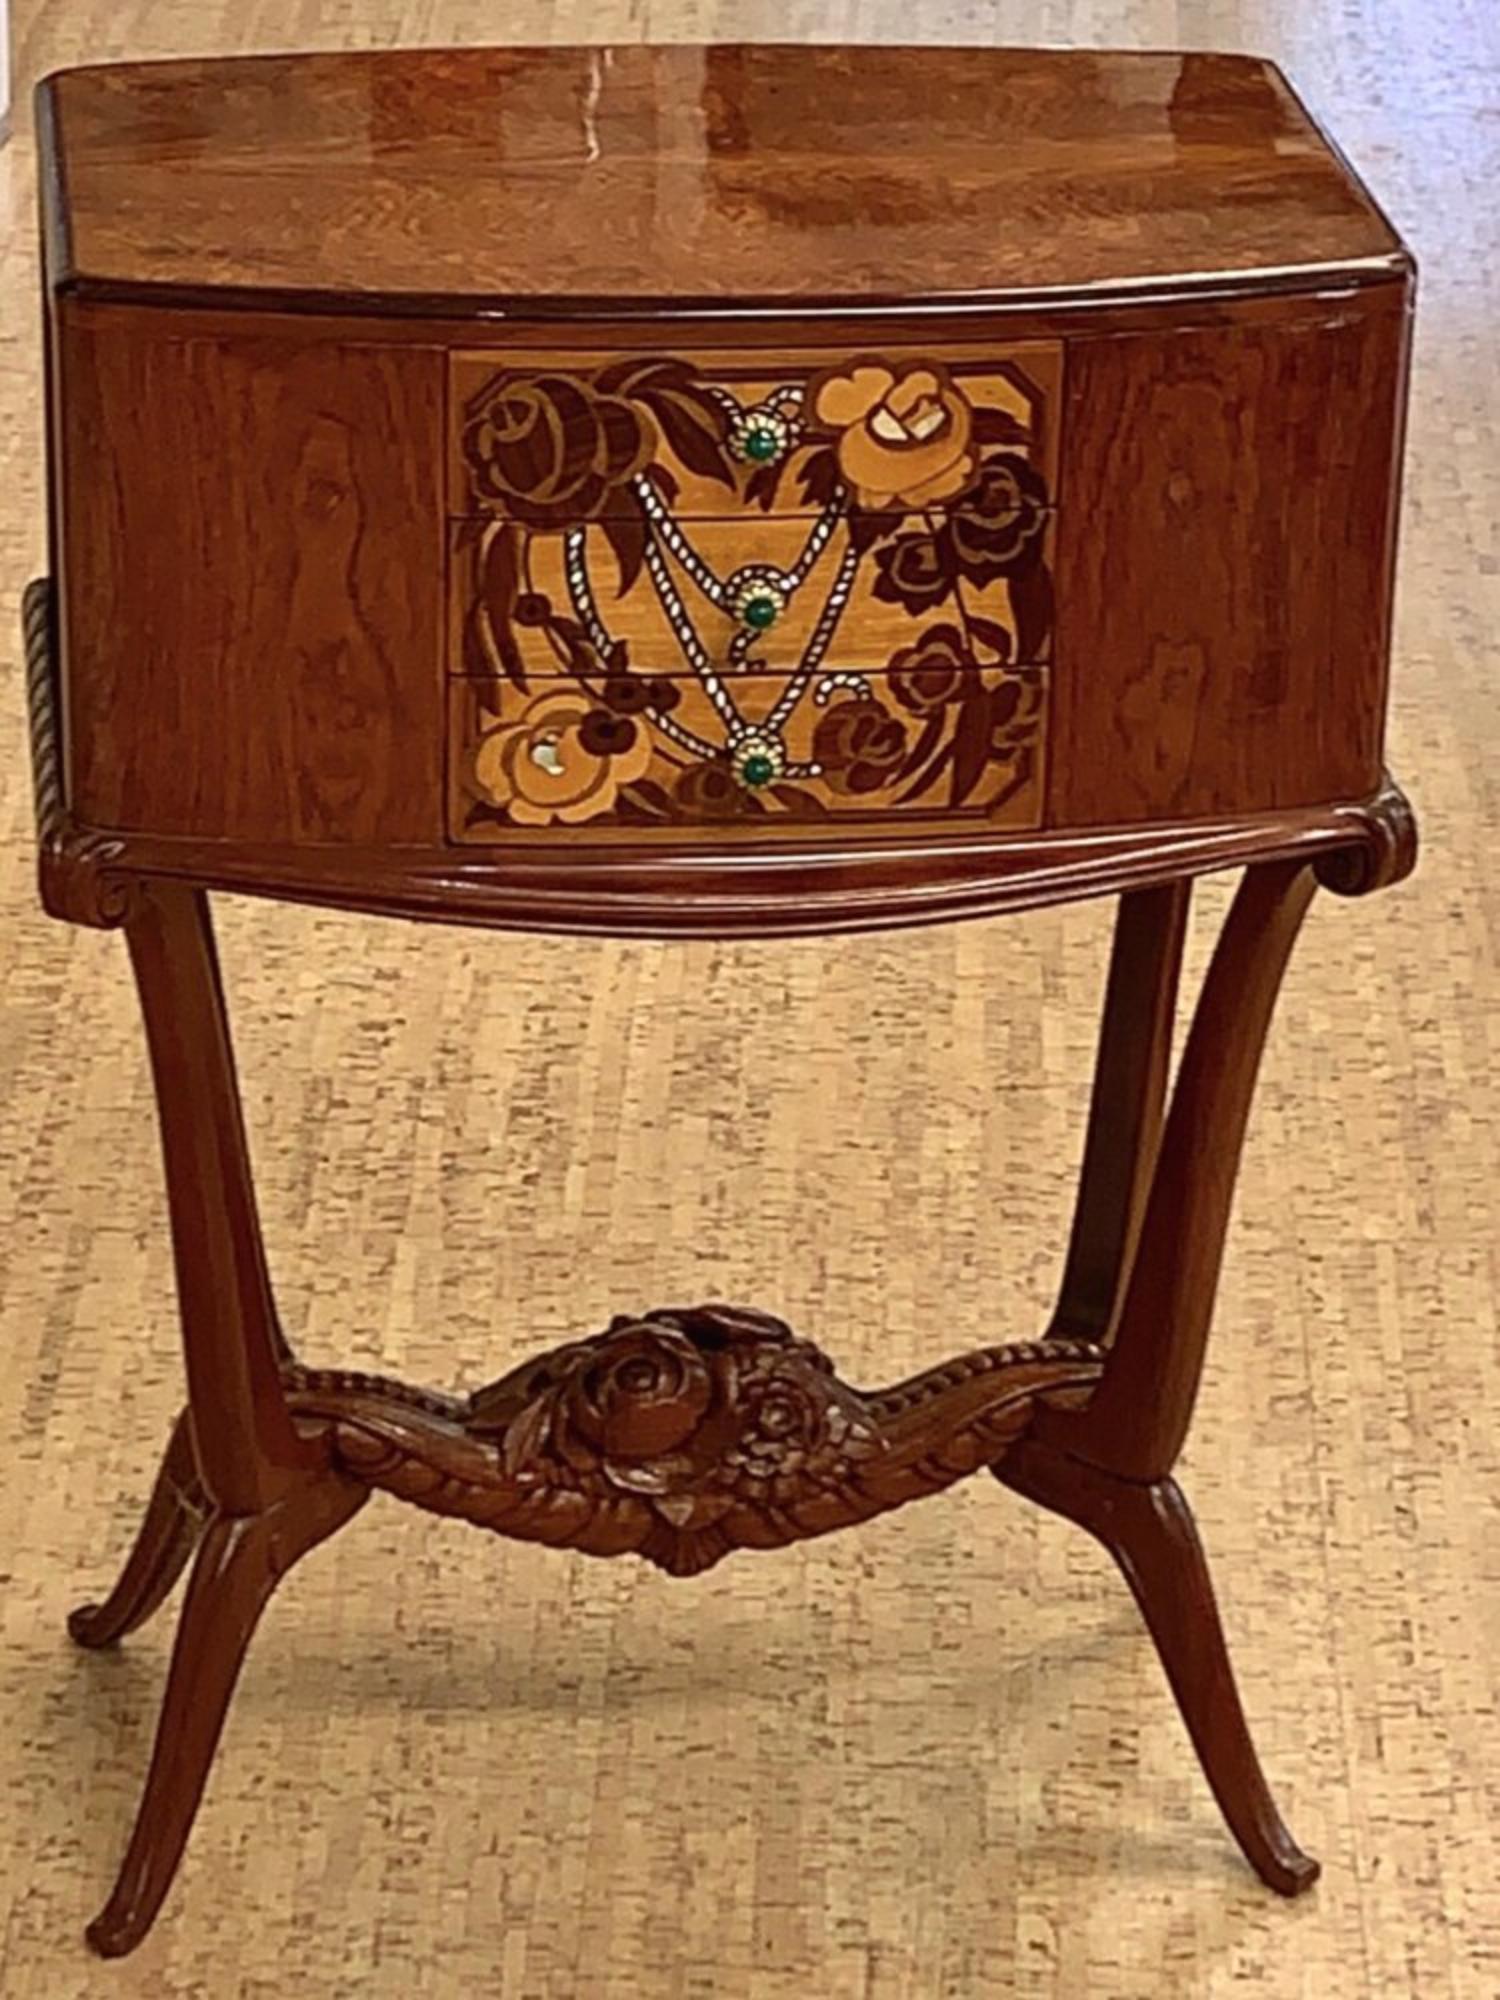 Early Classic French Art Deco side table/small cabinet by Lahalle et Levard, circa 1920. 19.5” wide x 12” deep x 26” high, in purple heart, boxwood, other exotic hardwoods, mother-of-pearl, with chrysophase mounted bronze drawer pulls. Identical